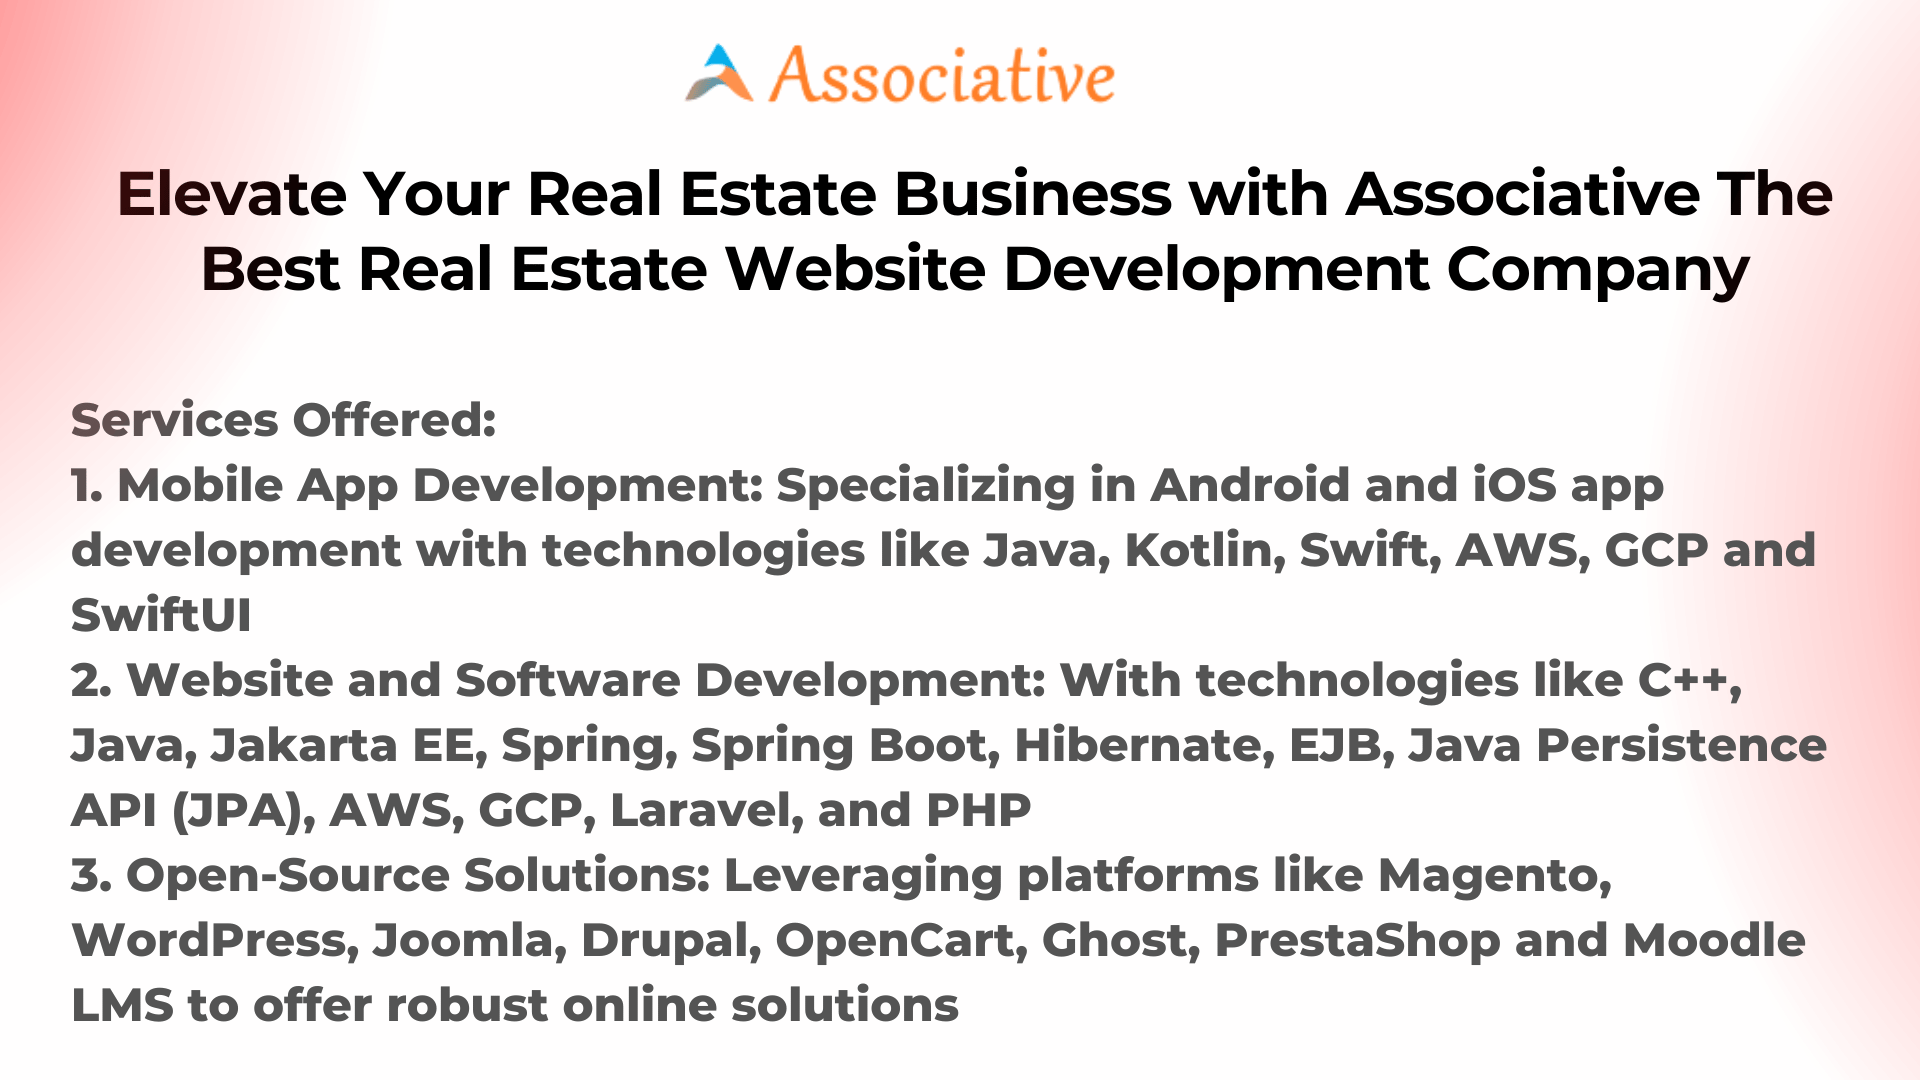 Elevate Your Real Estate Business with Associative The Best Real Estate Website Development Company